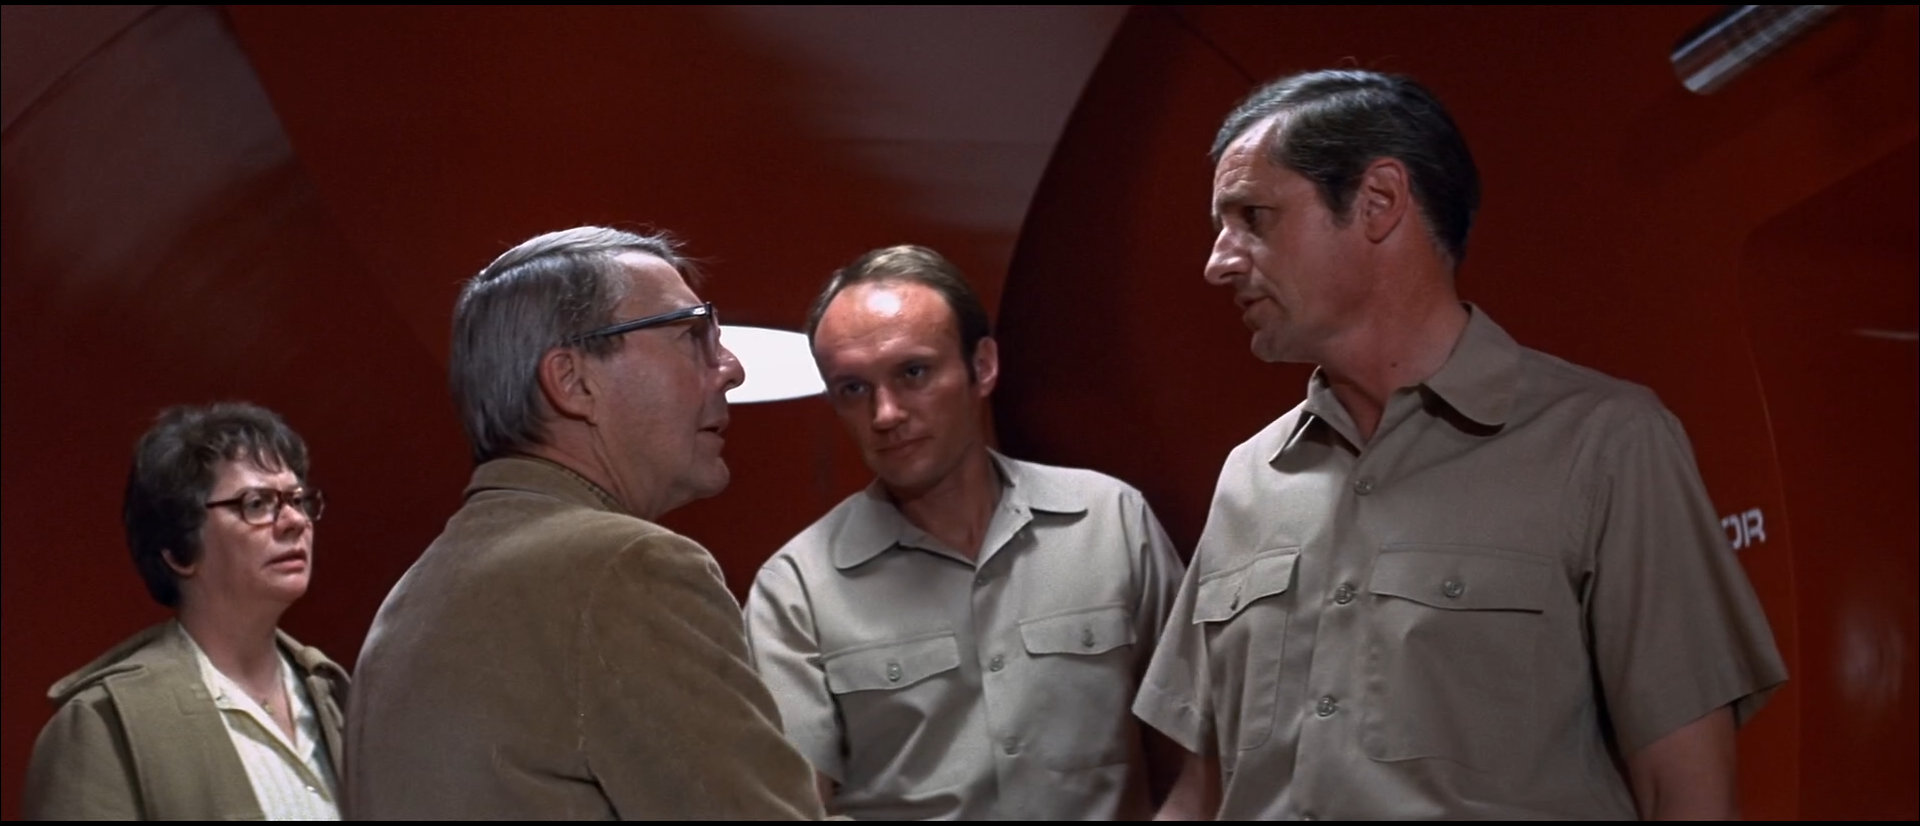 Amazing The Andromeda Strain (1971) Pictures & Backgrounds